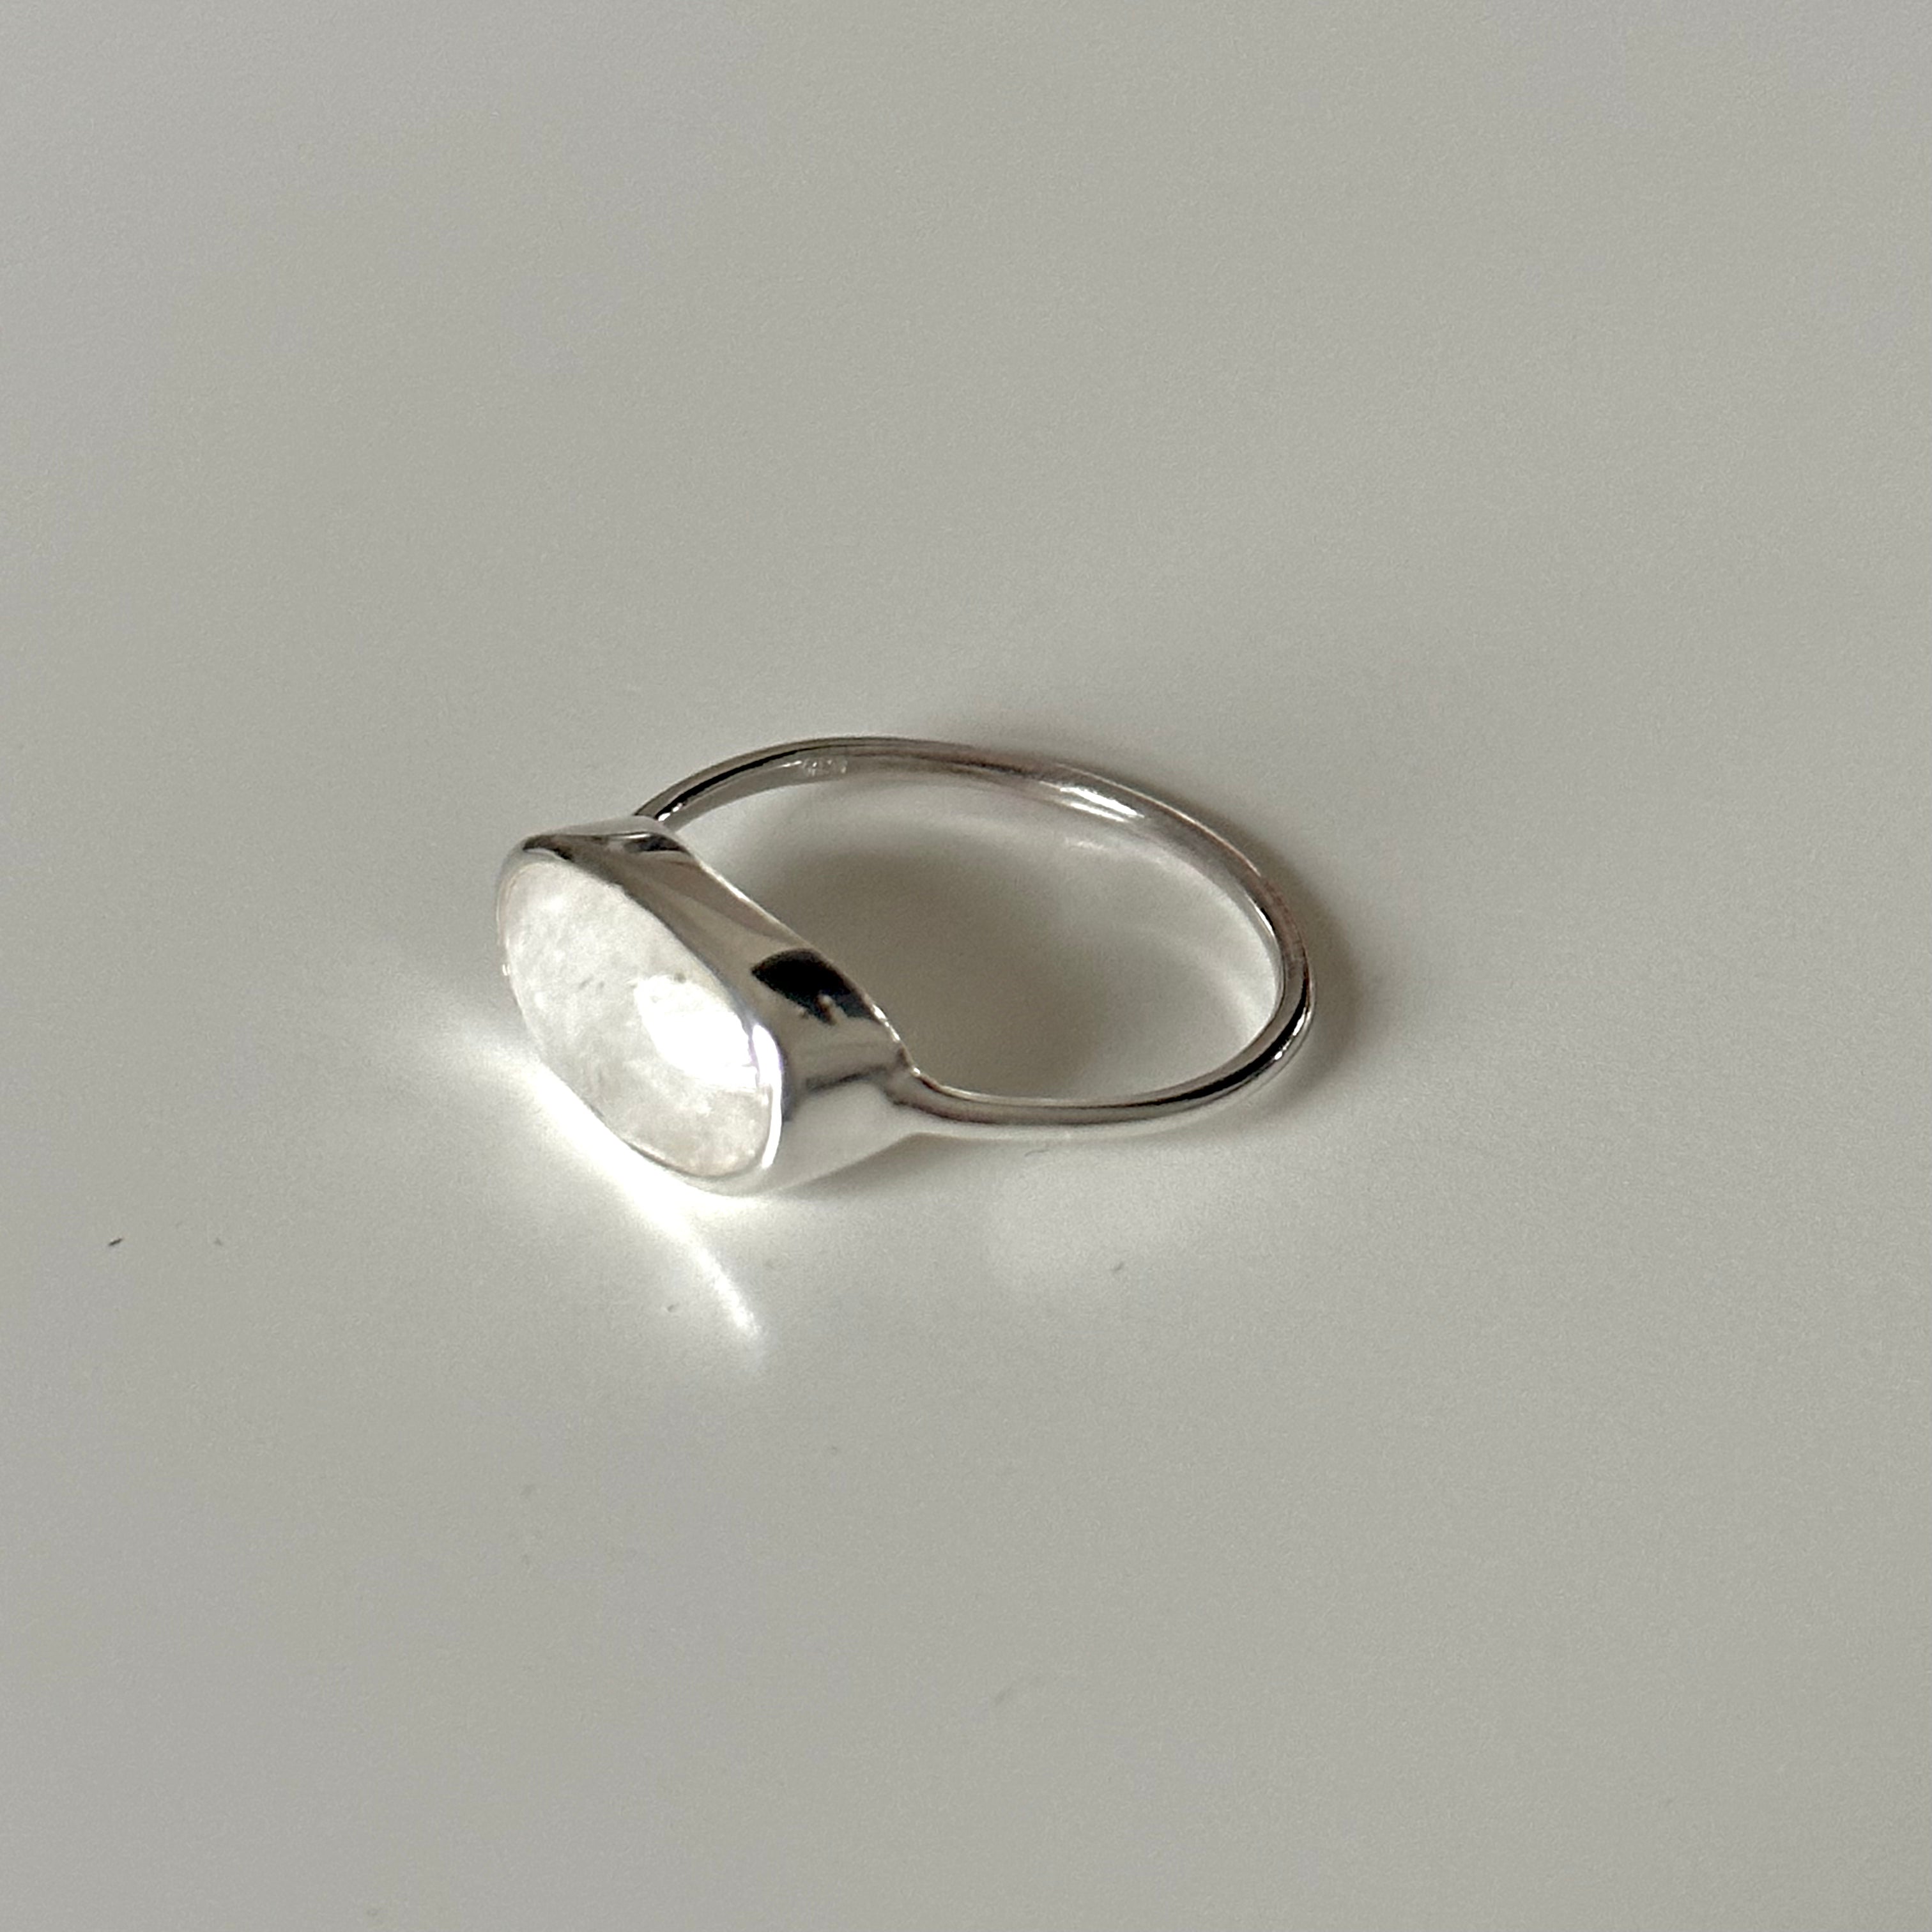 Faceted Oval Cut Natural Gemstone Sterling Silver Fine Band Ring - Moonstone